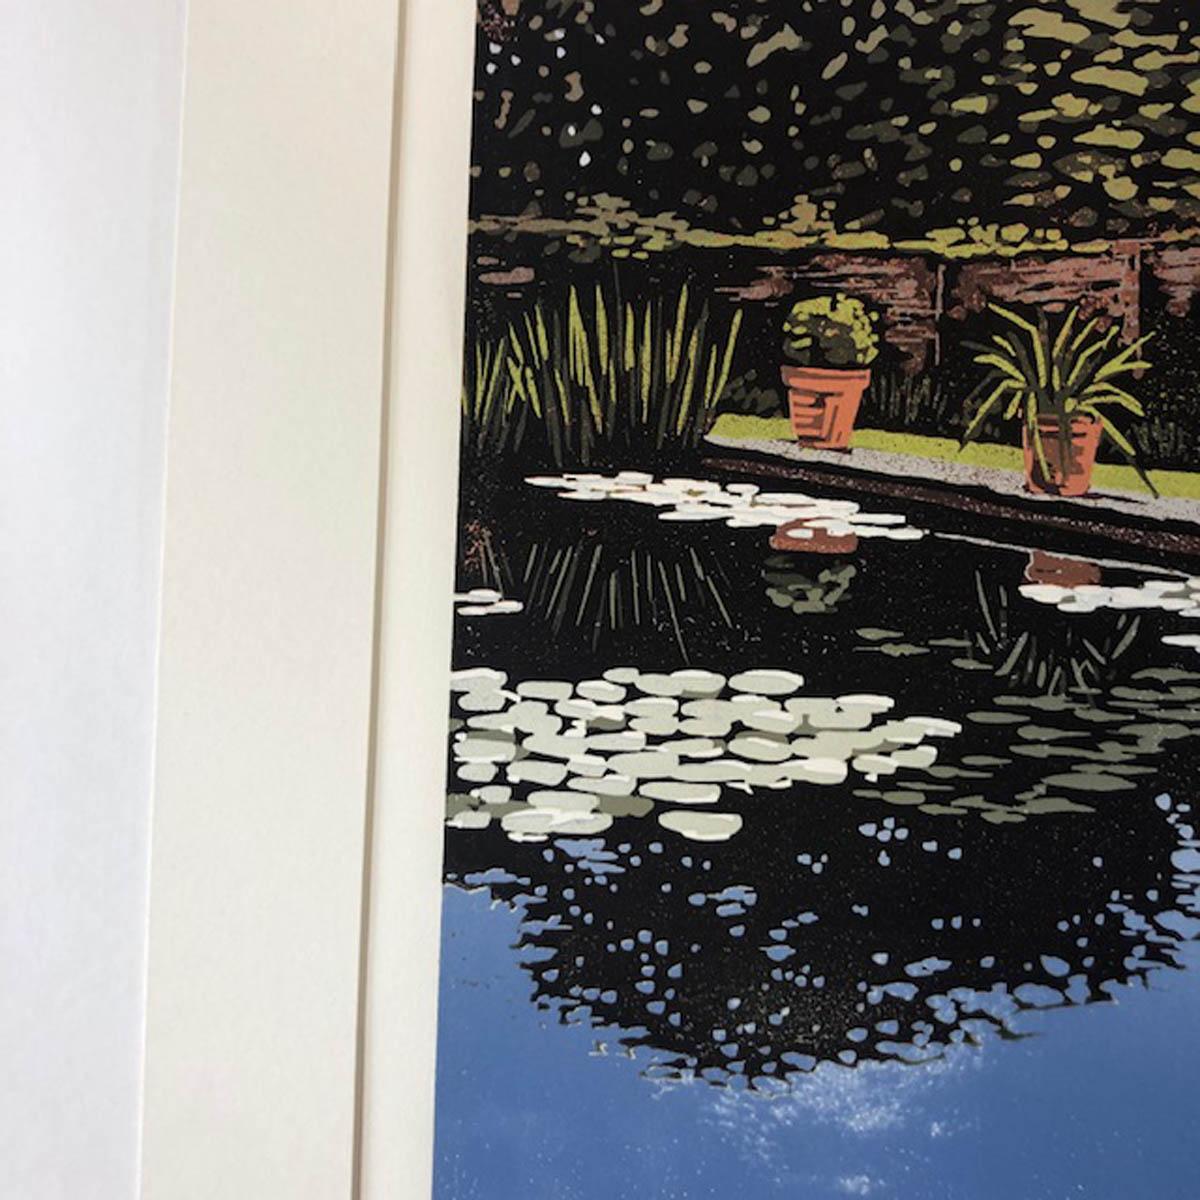 Created in 2018 by Alexandra Buckle.

A large reduction linocut of a walled garden and lily pond with reflected trees. This is printed in nine layers of colour and is a small edition of 10 prints, all of which are printed by hand so small variations